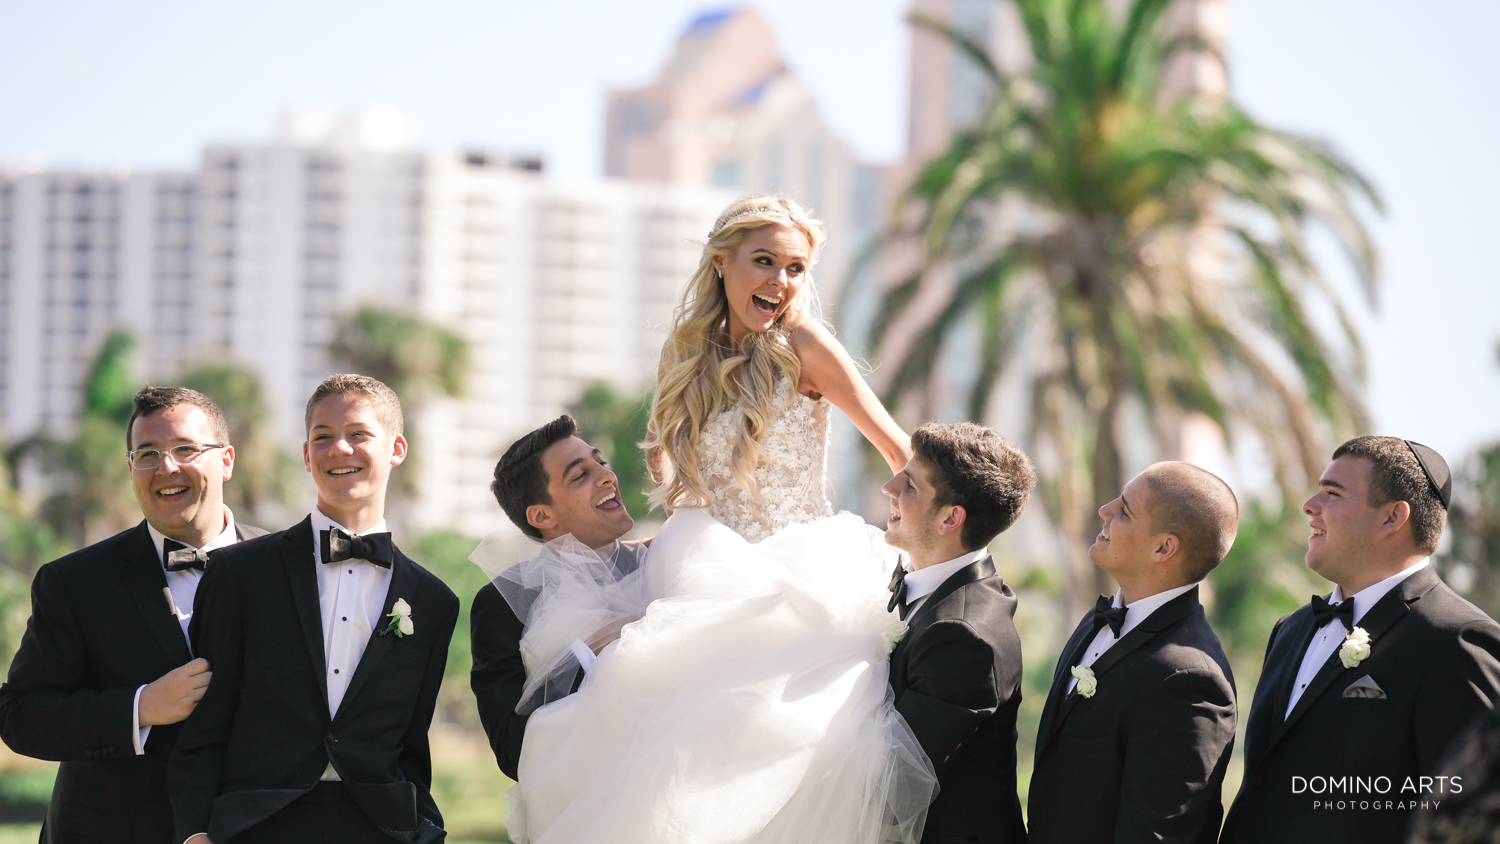 Fun groomsmen with bride picture